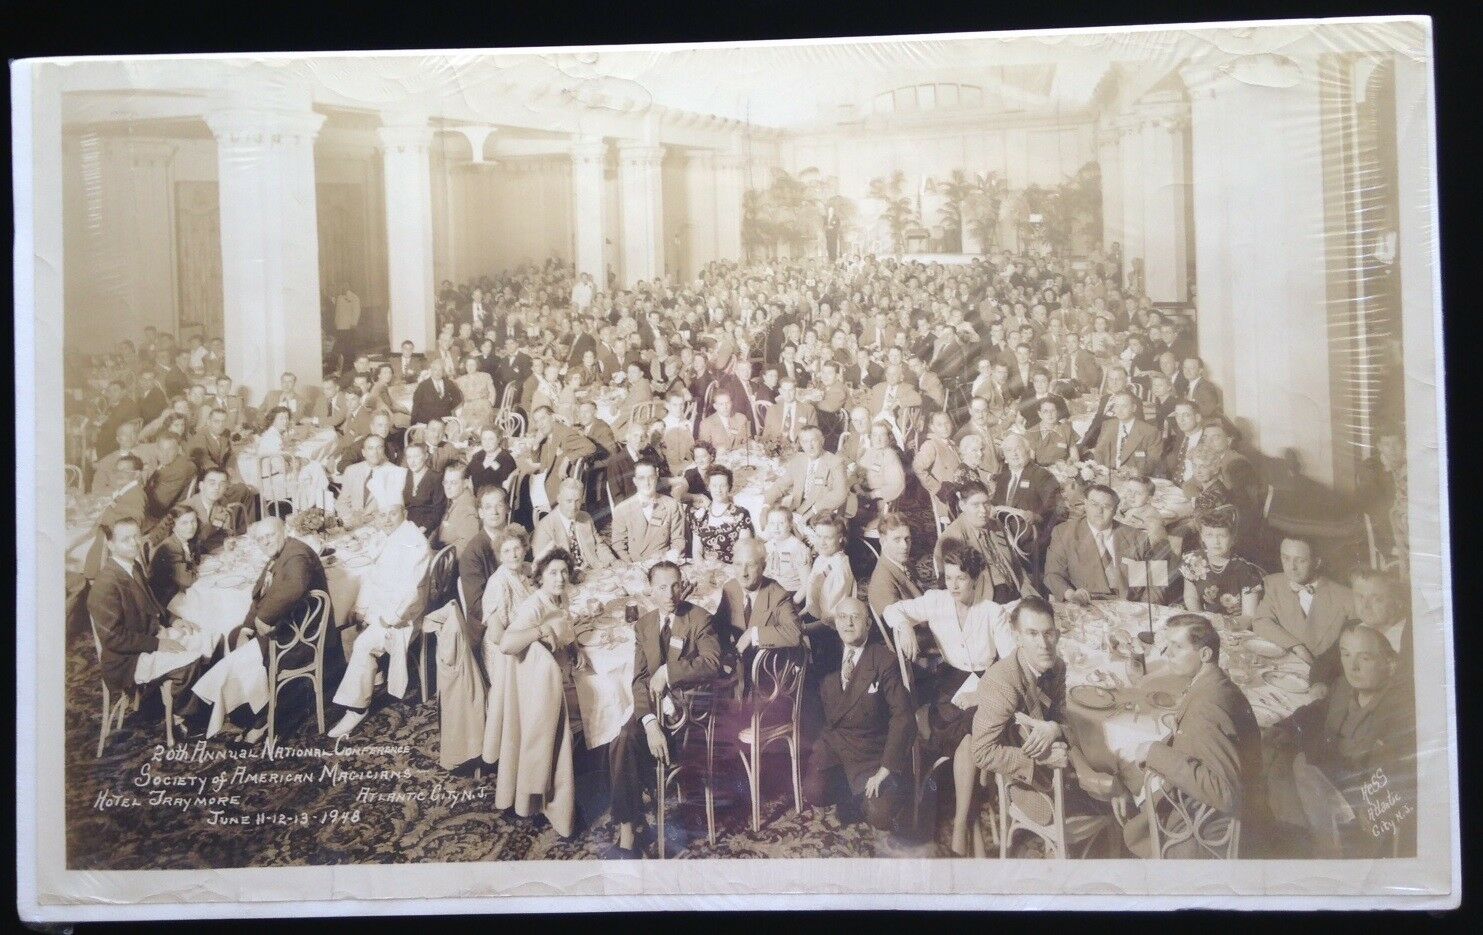 20th Annual Nat'l Conference Sam Conv Panoramic Photo From 1948 Now 72 Years Old